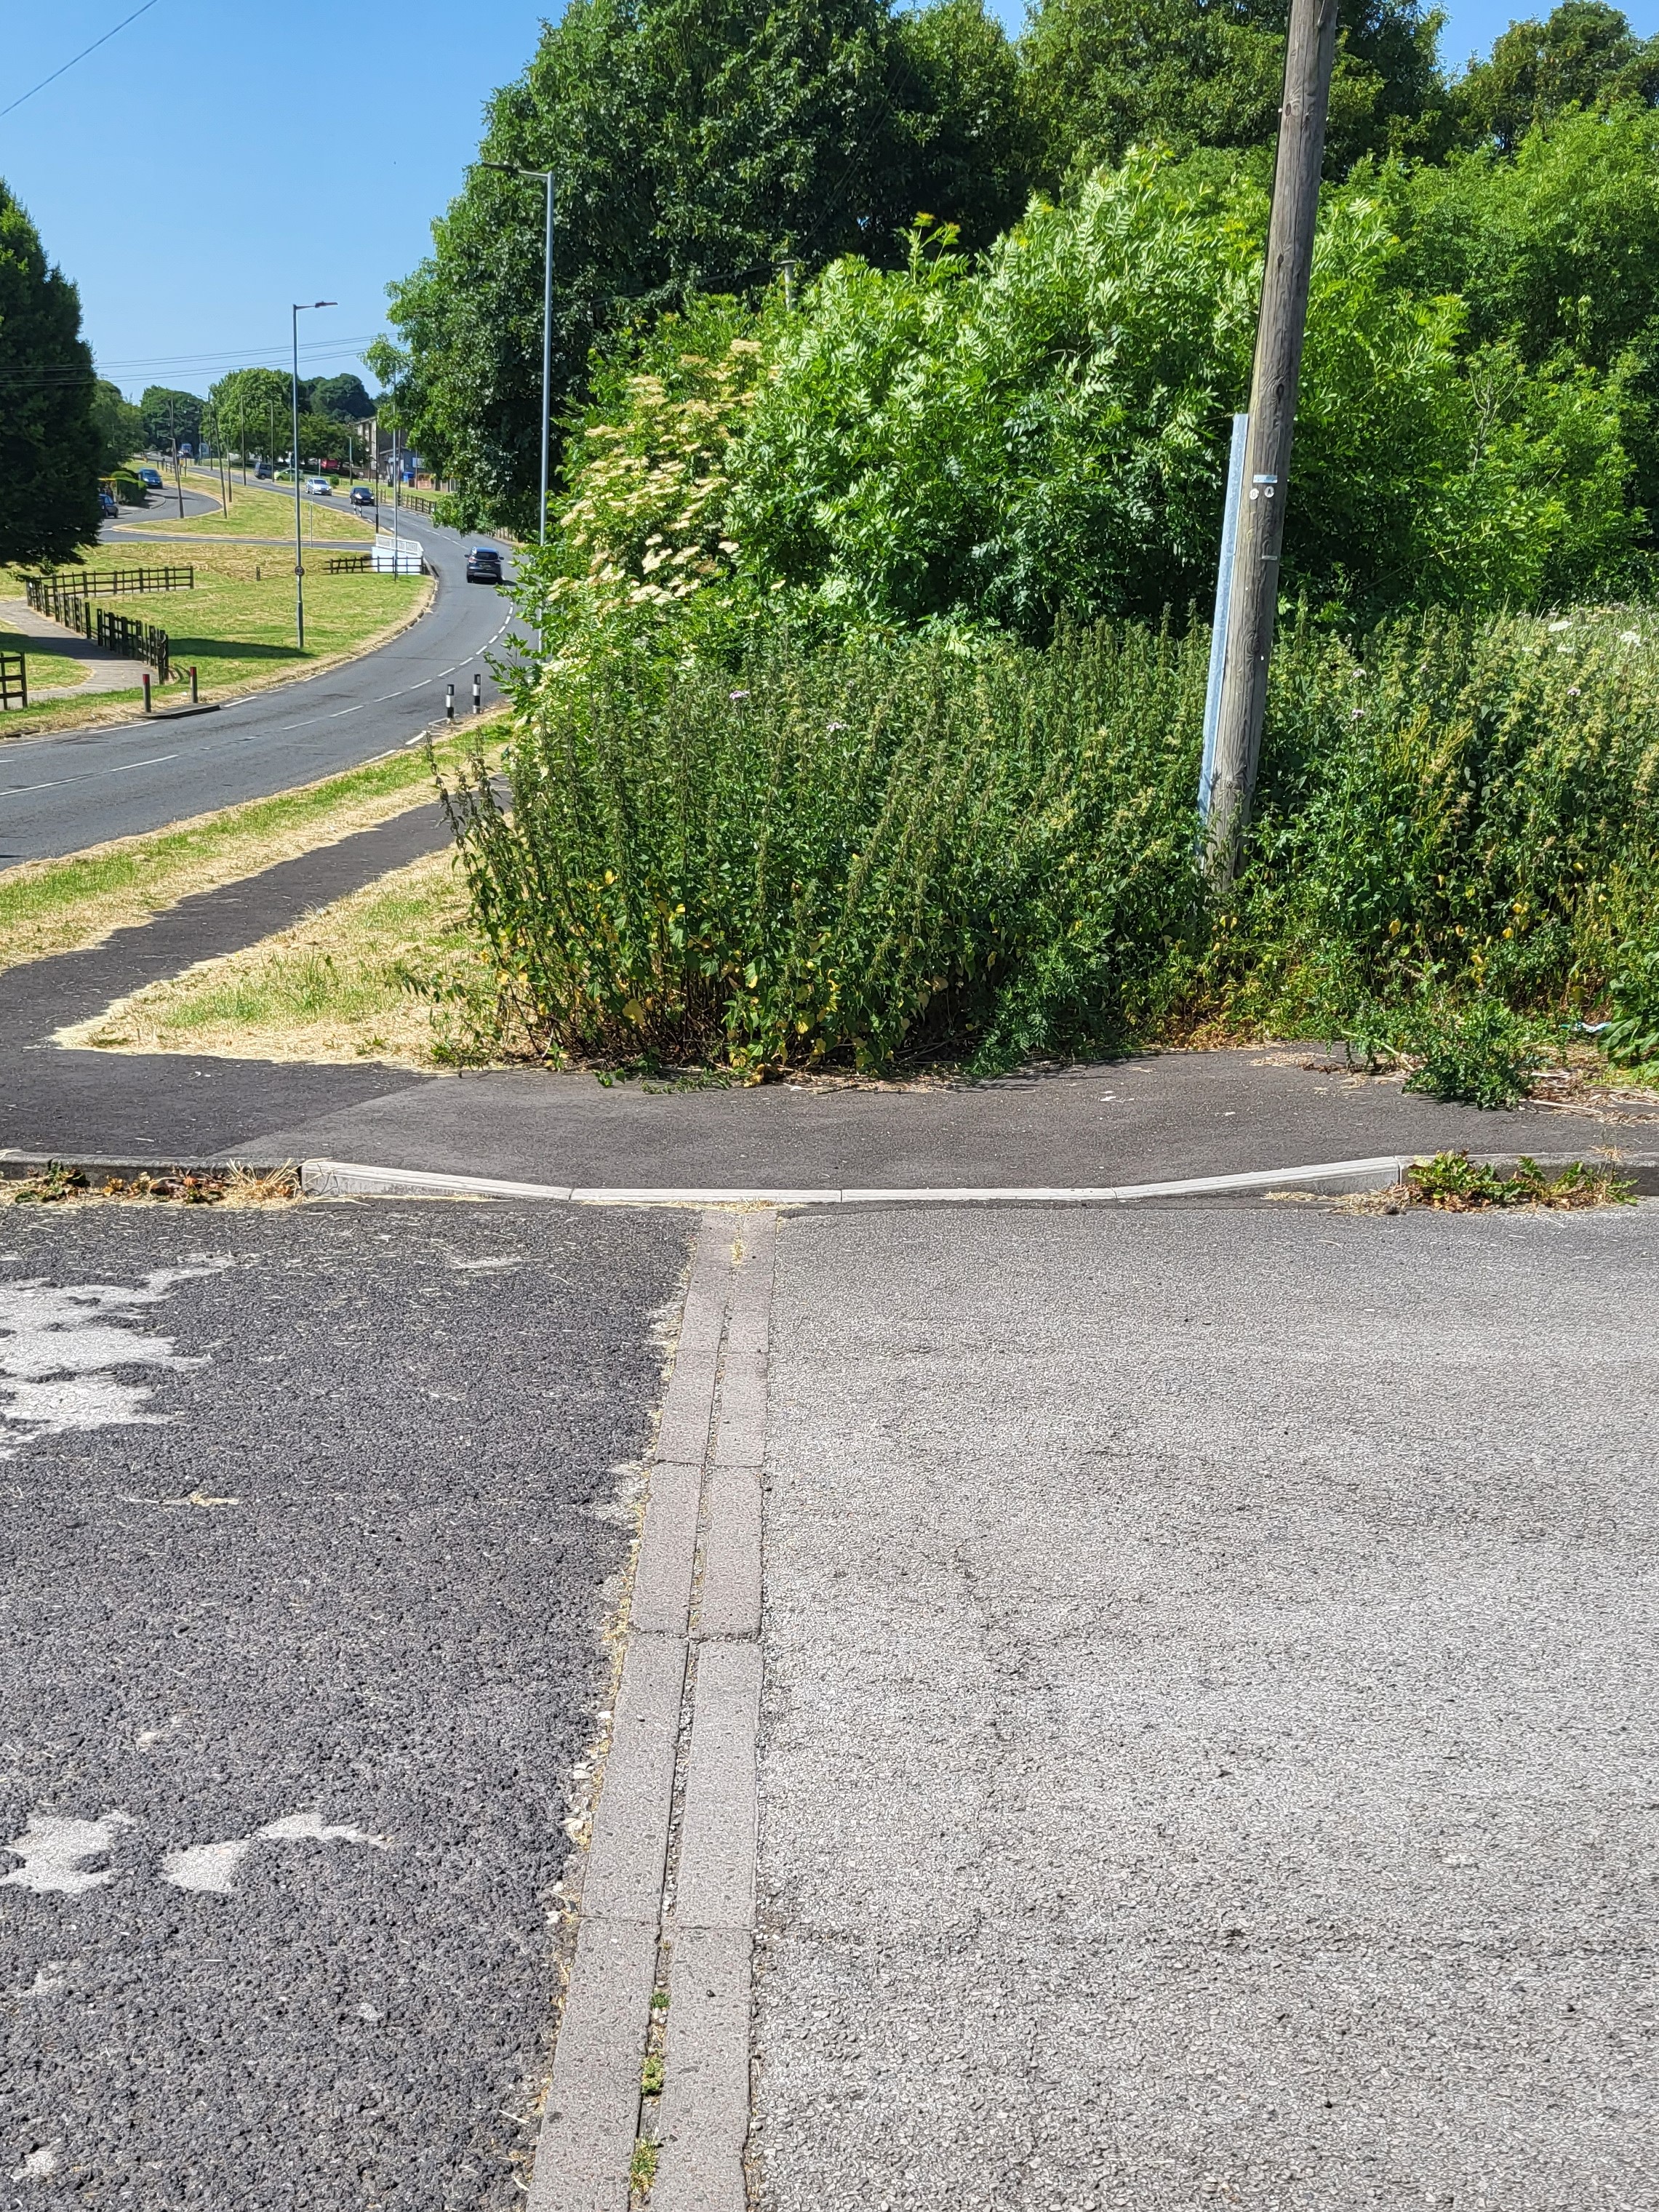 Single footway dropped access kerb